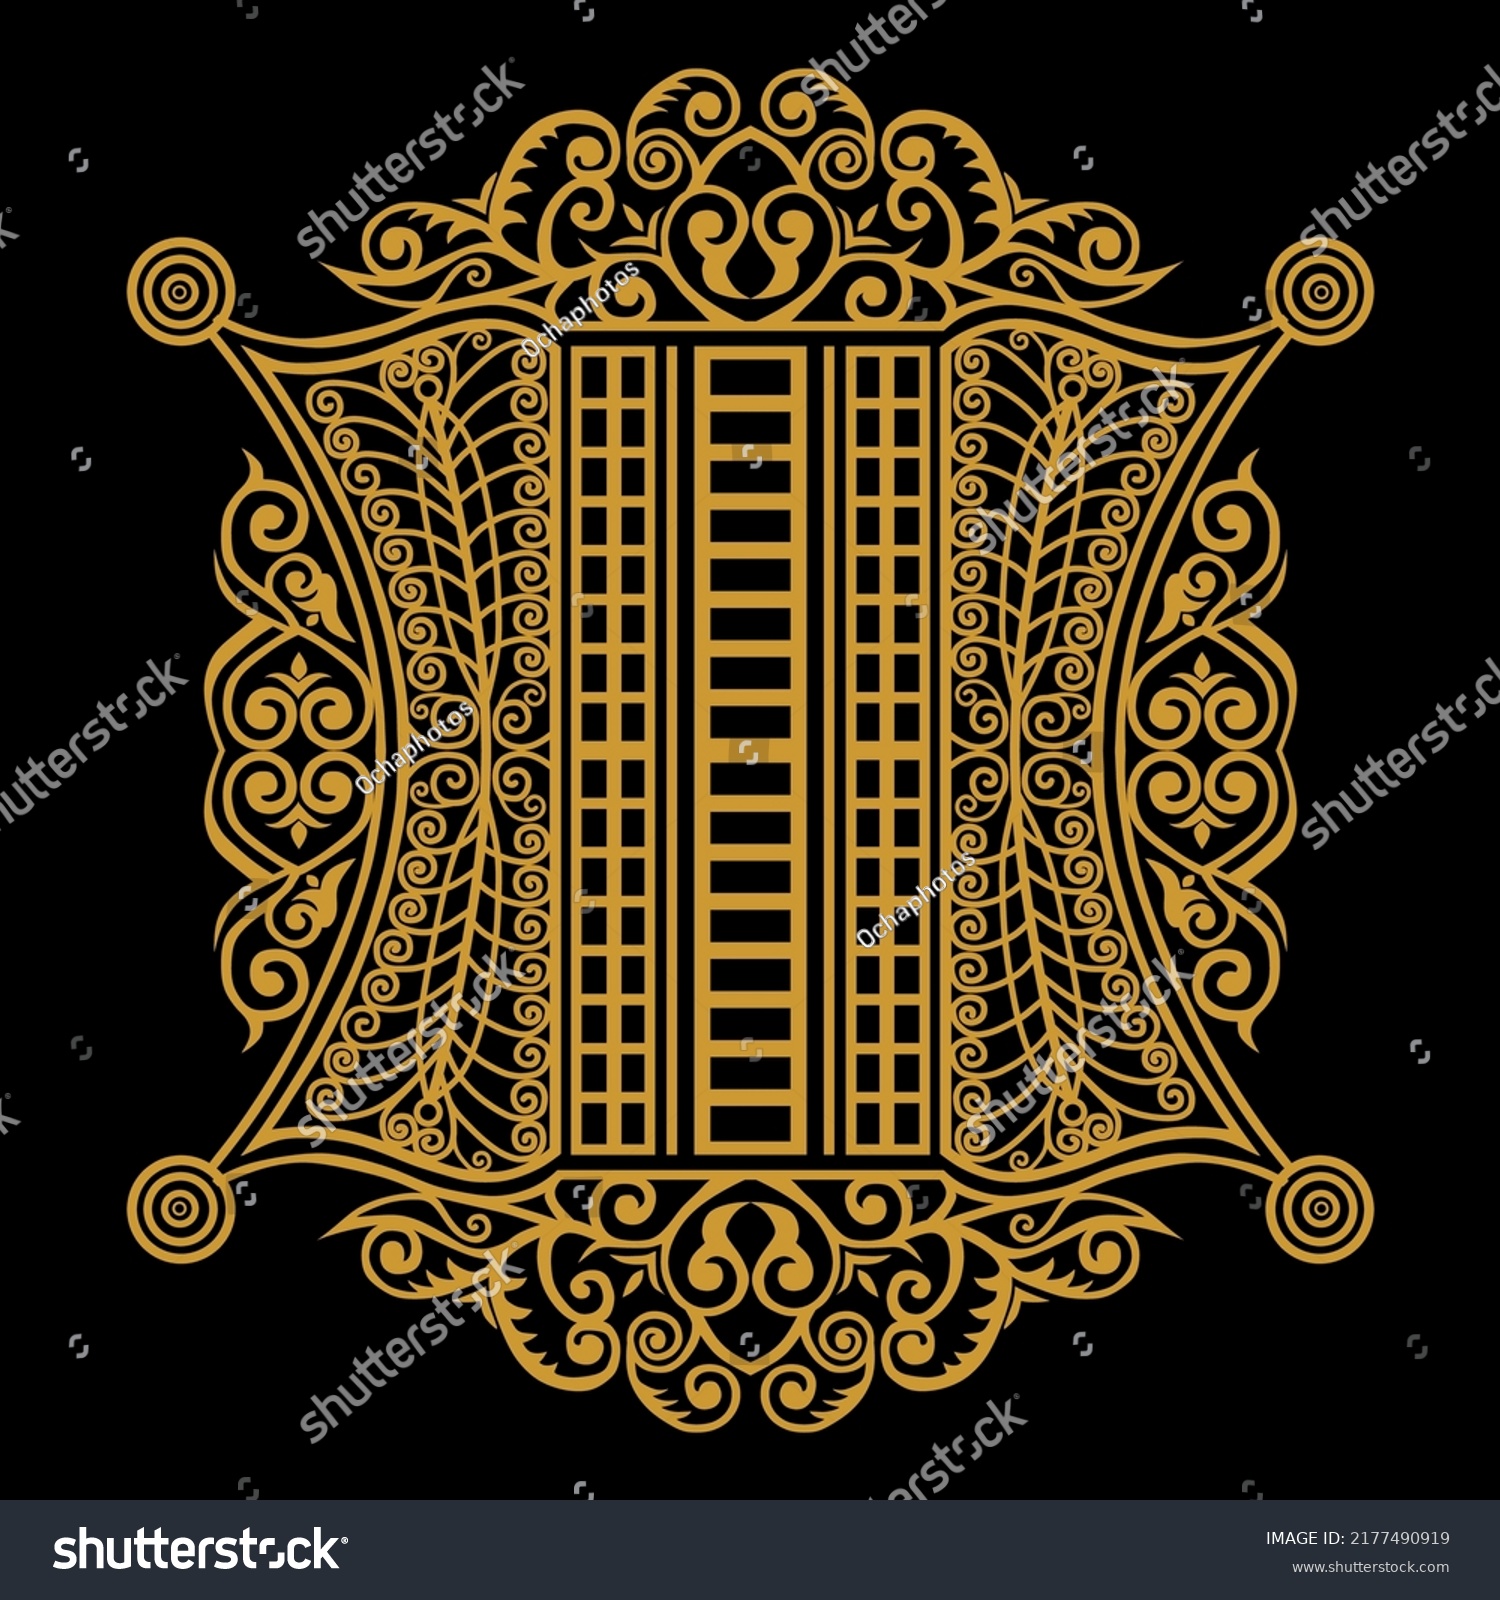 SVG of Pinto Aceh, Aceh's traditional ornament, symbol of Aceh's special region svg